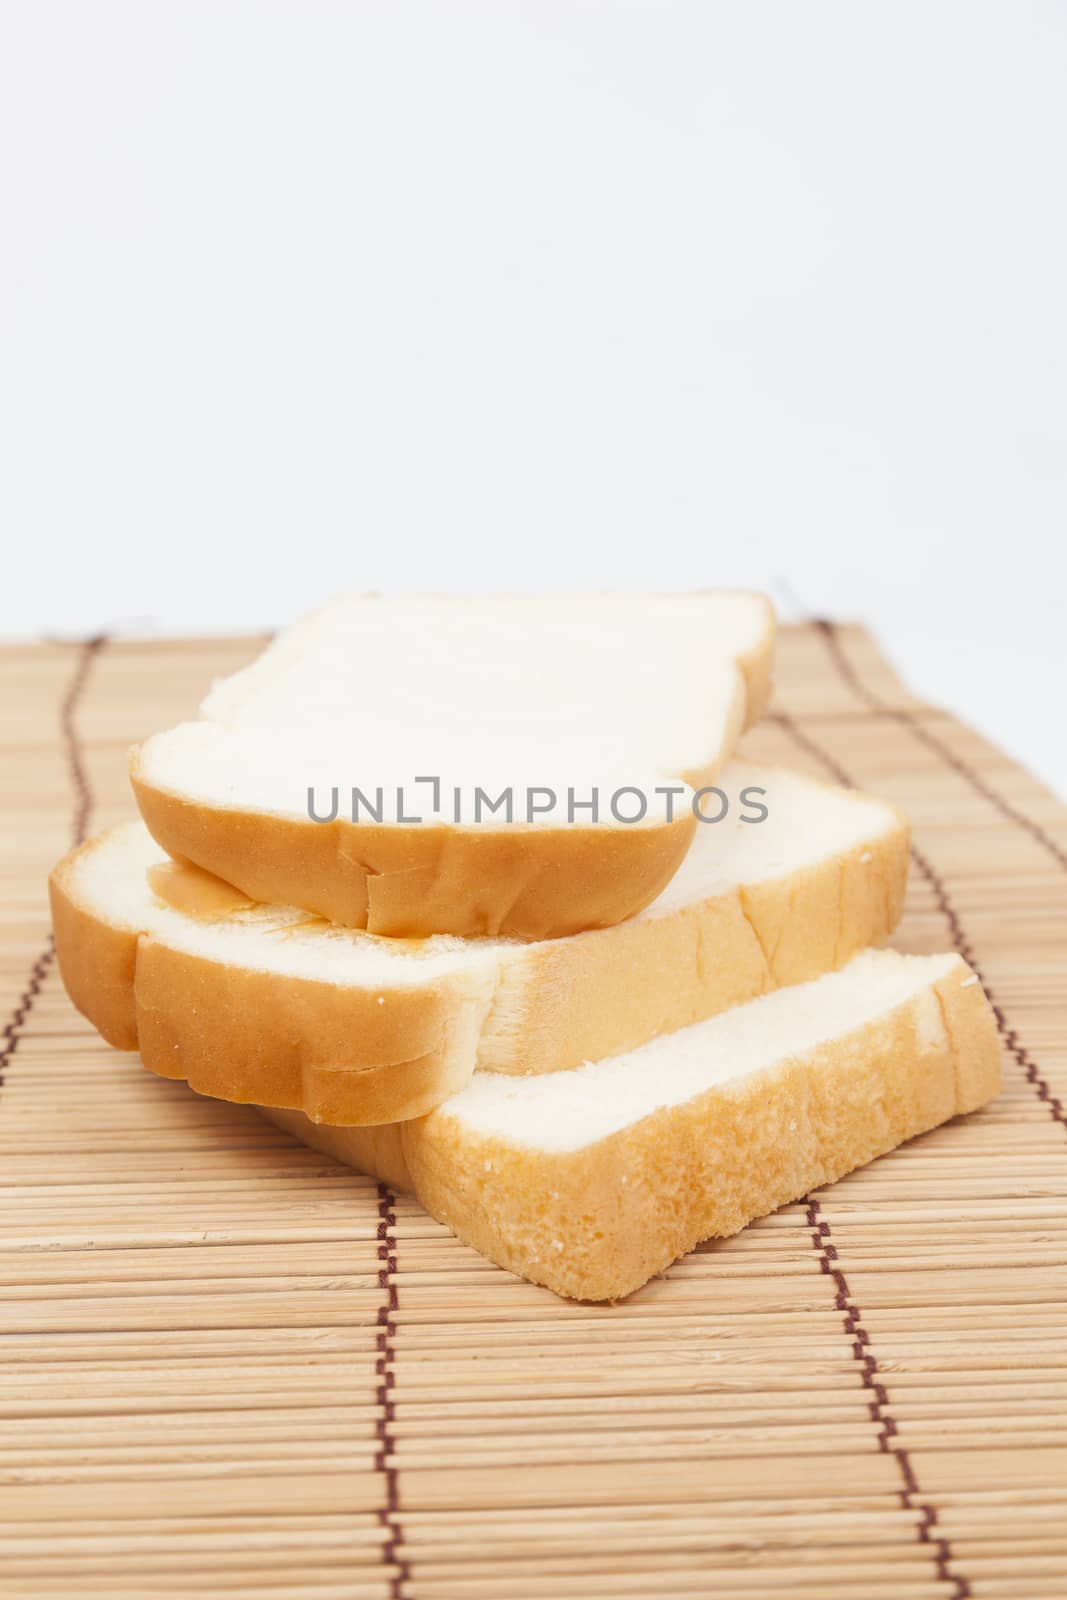 Sliced ������bread on the wooden plate.pack-shot bread in studio.